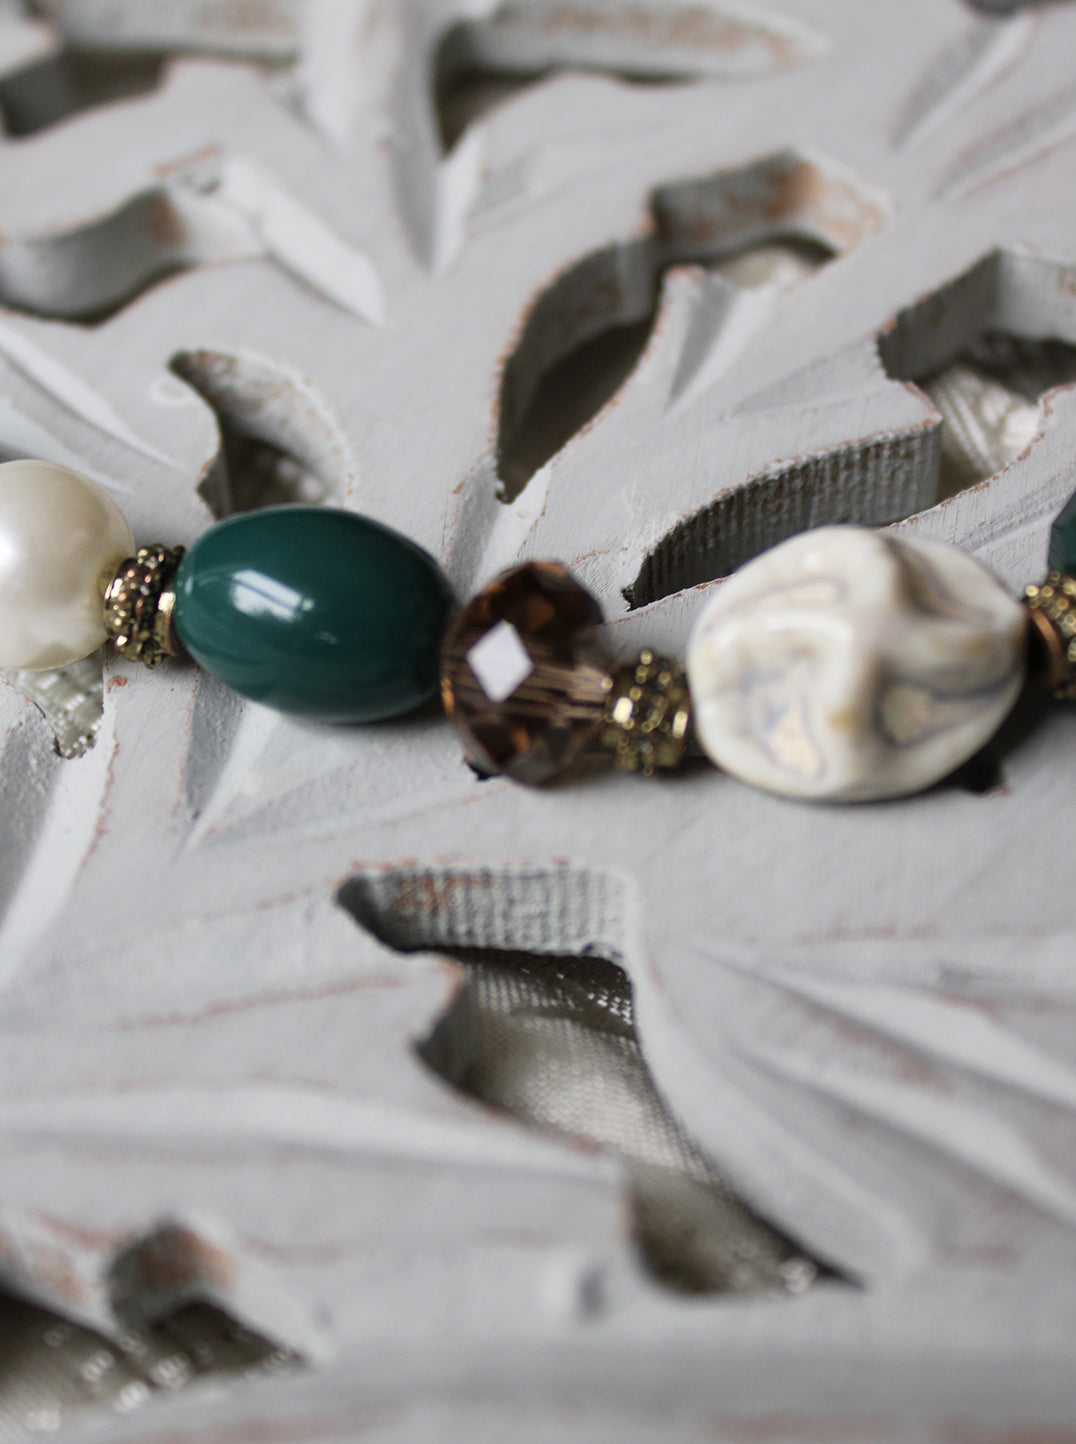 Green, Amber & White Bead Necklace